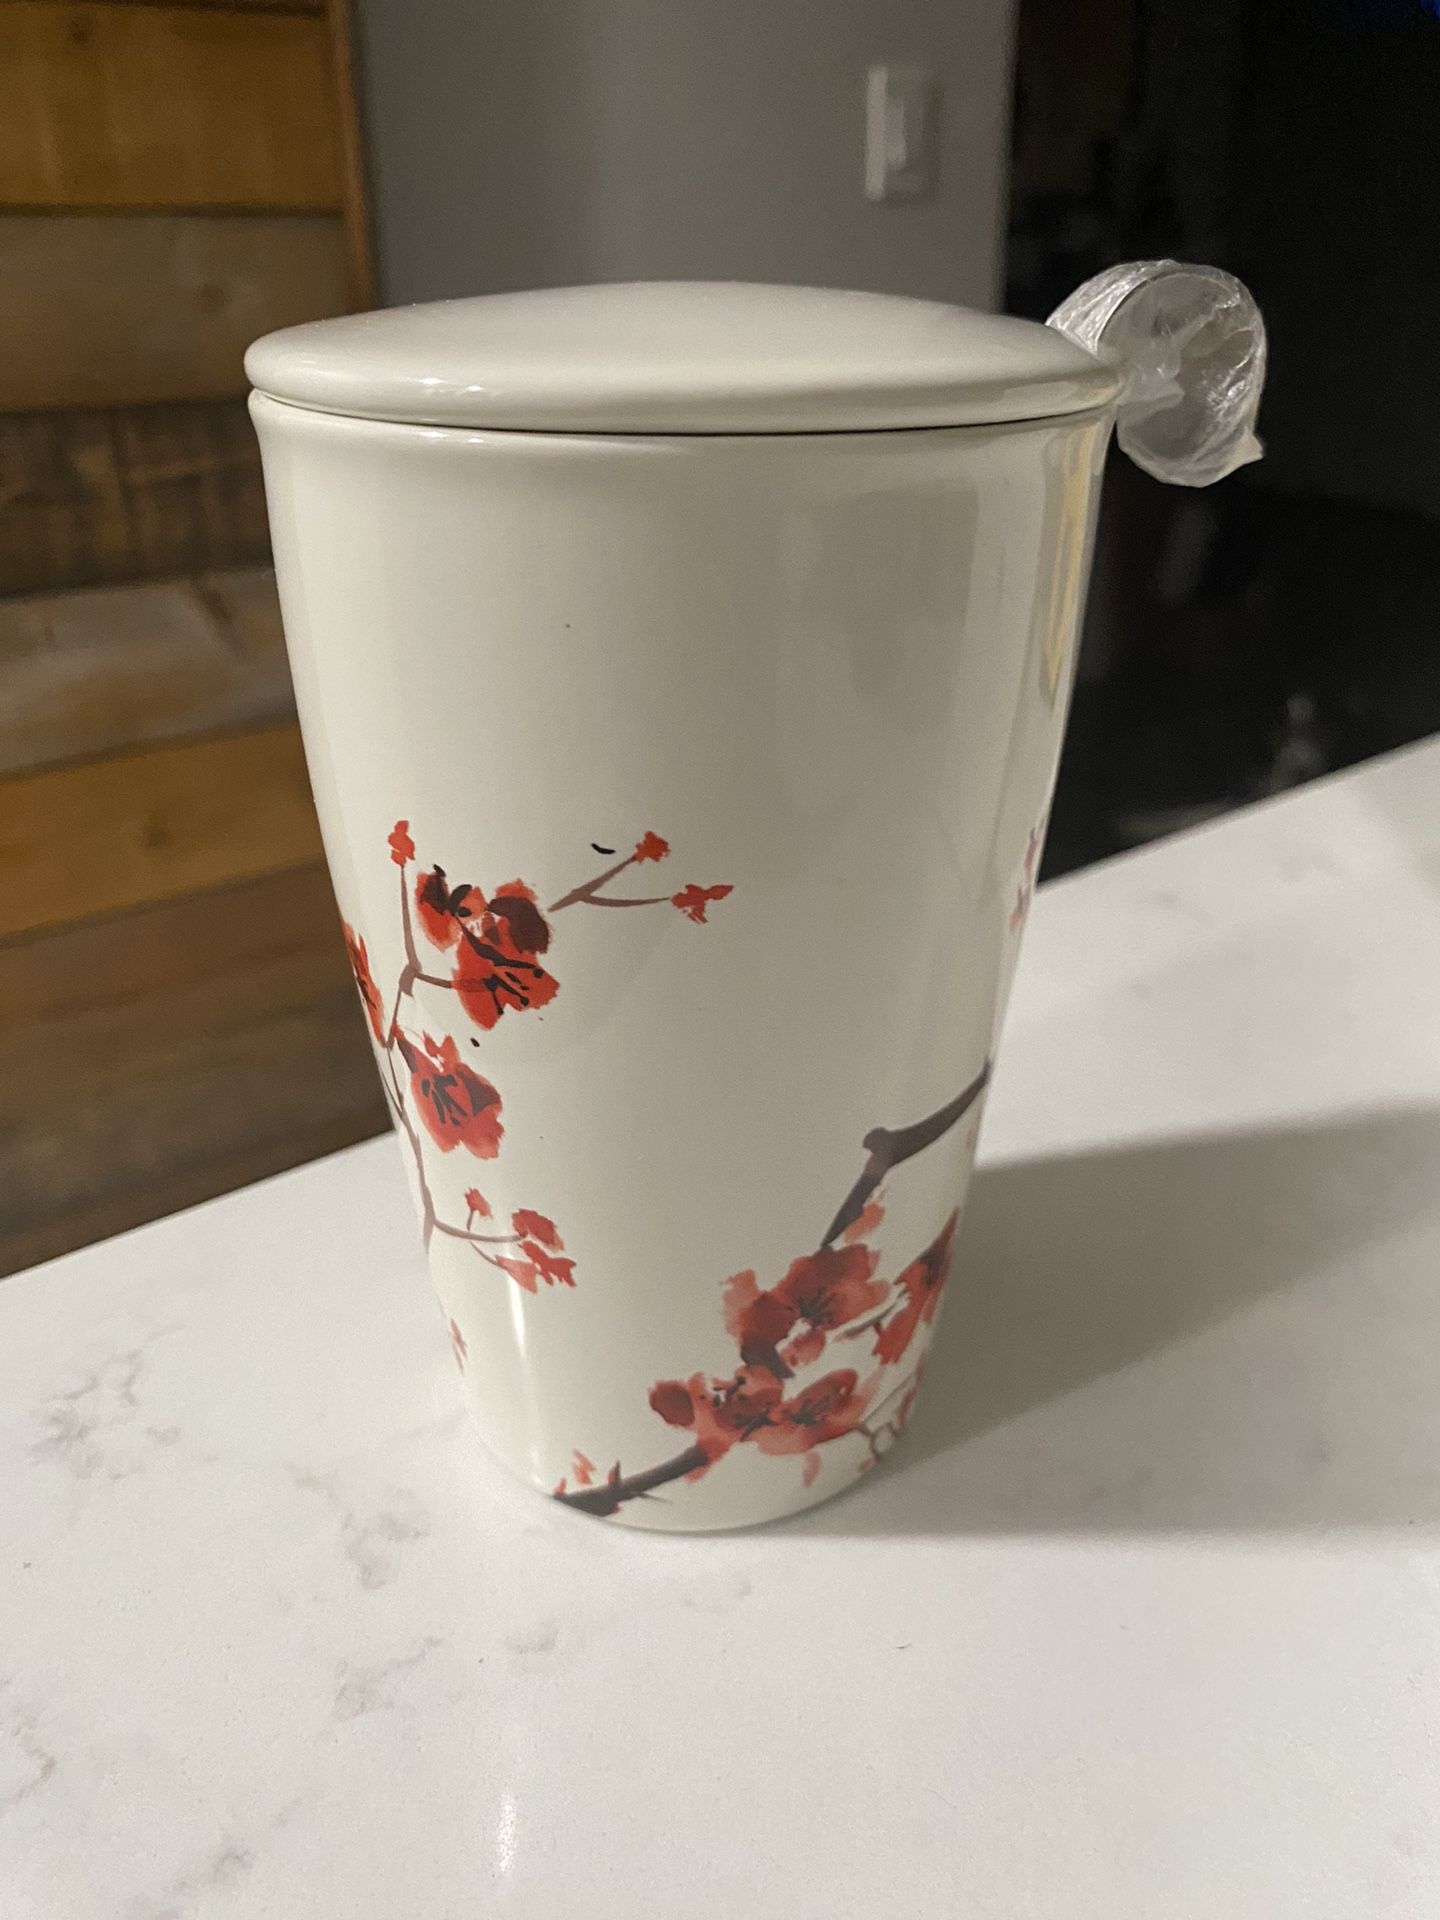 NEW TEA FORTE CHERRY BLOSSOM KATI STEEPING CUP & INFUSER 